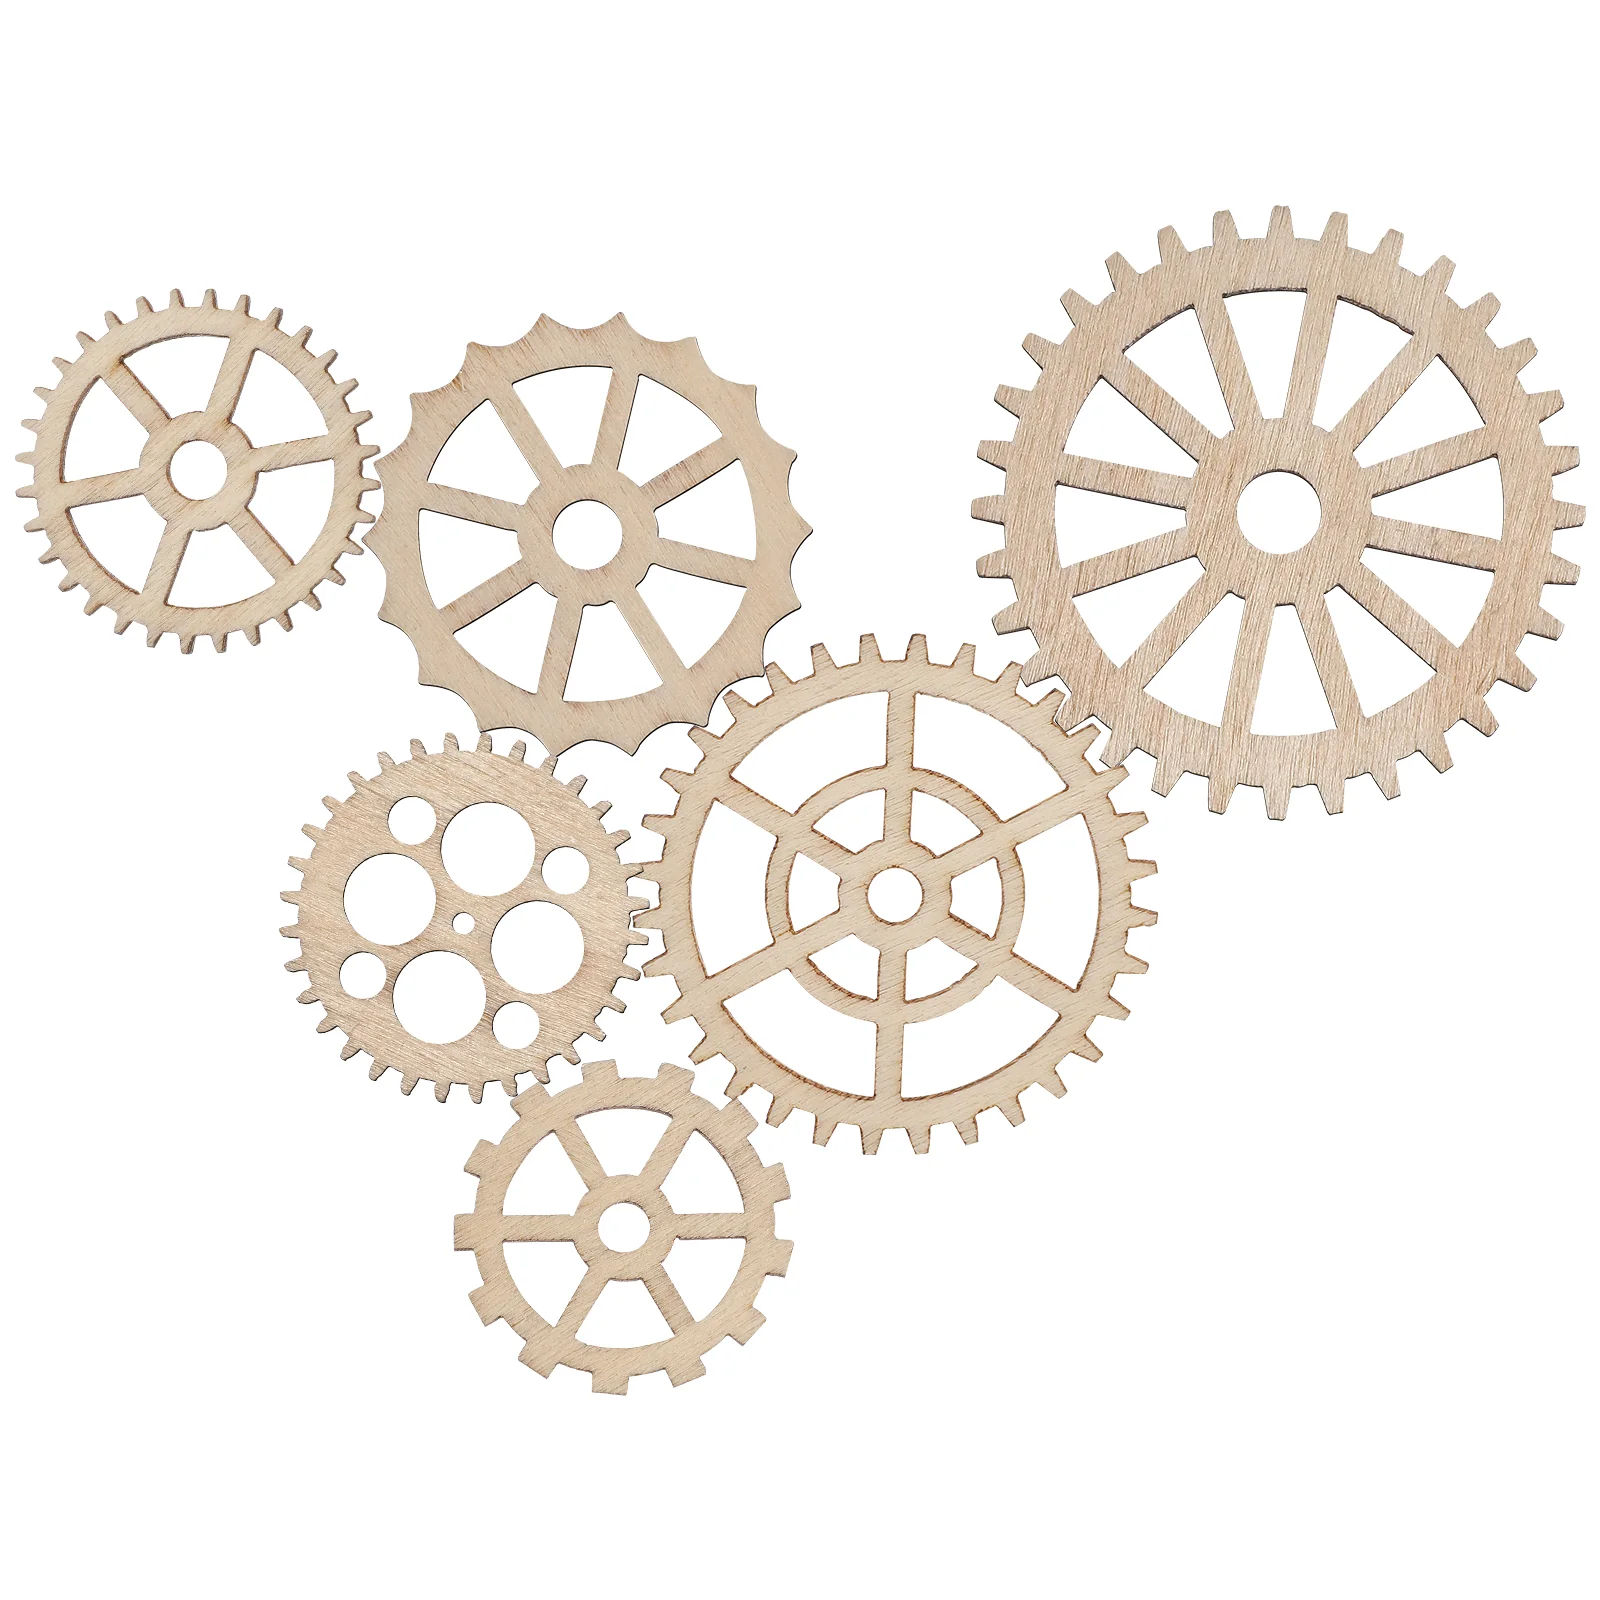 

Wooden Gear Crafts Gears Wood Cutouts Wheels Buttons Diy Steampunk Unfinished Slices Crafting Mini Decorations Craft Assorted